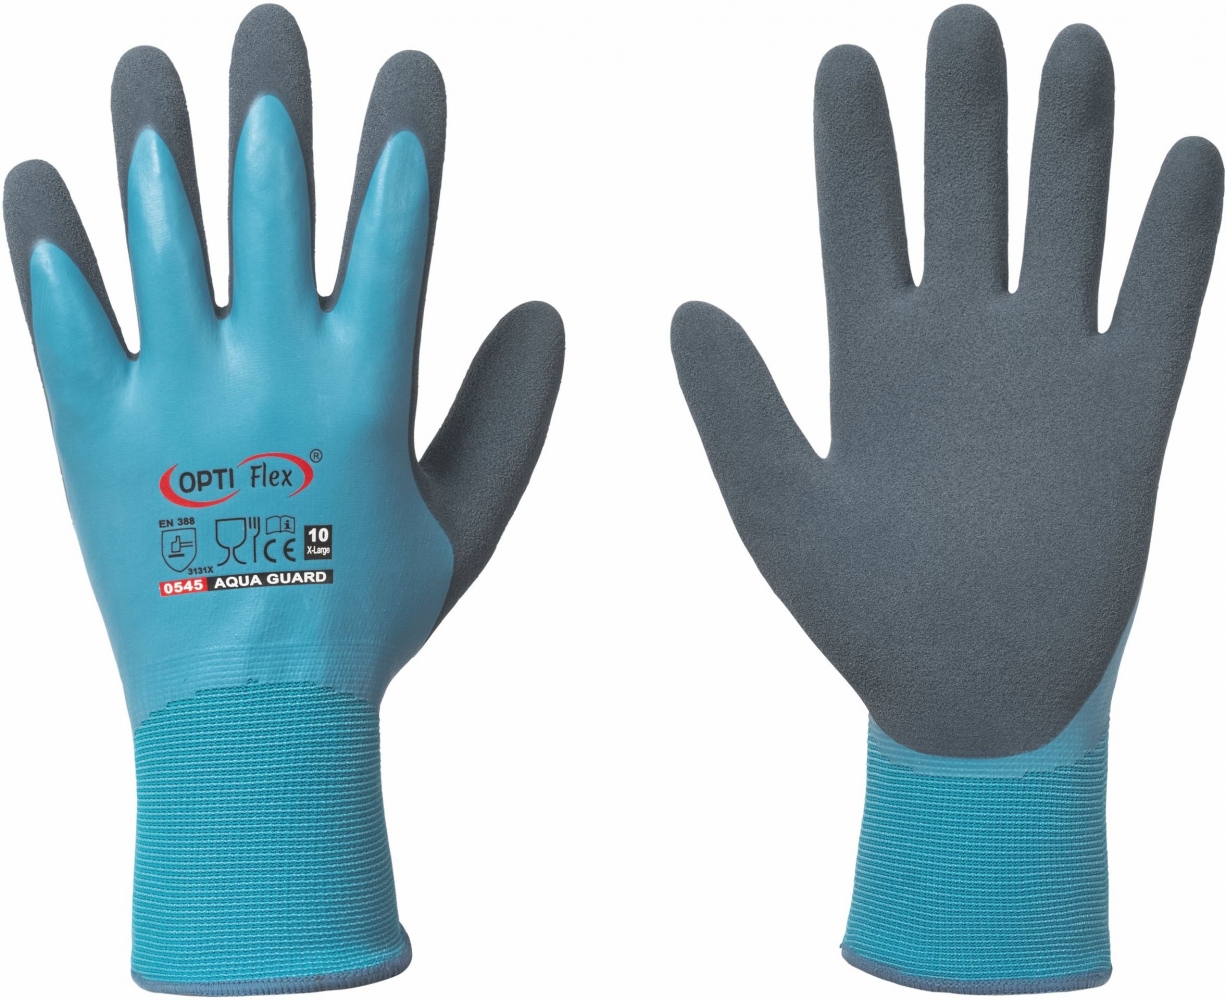 OPTI Flex® 0545 Aqua Guard Latex Working Gloves For Food Industry - online  purchase